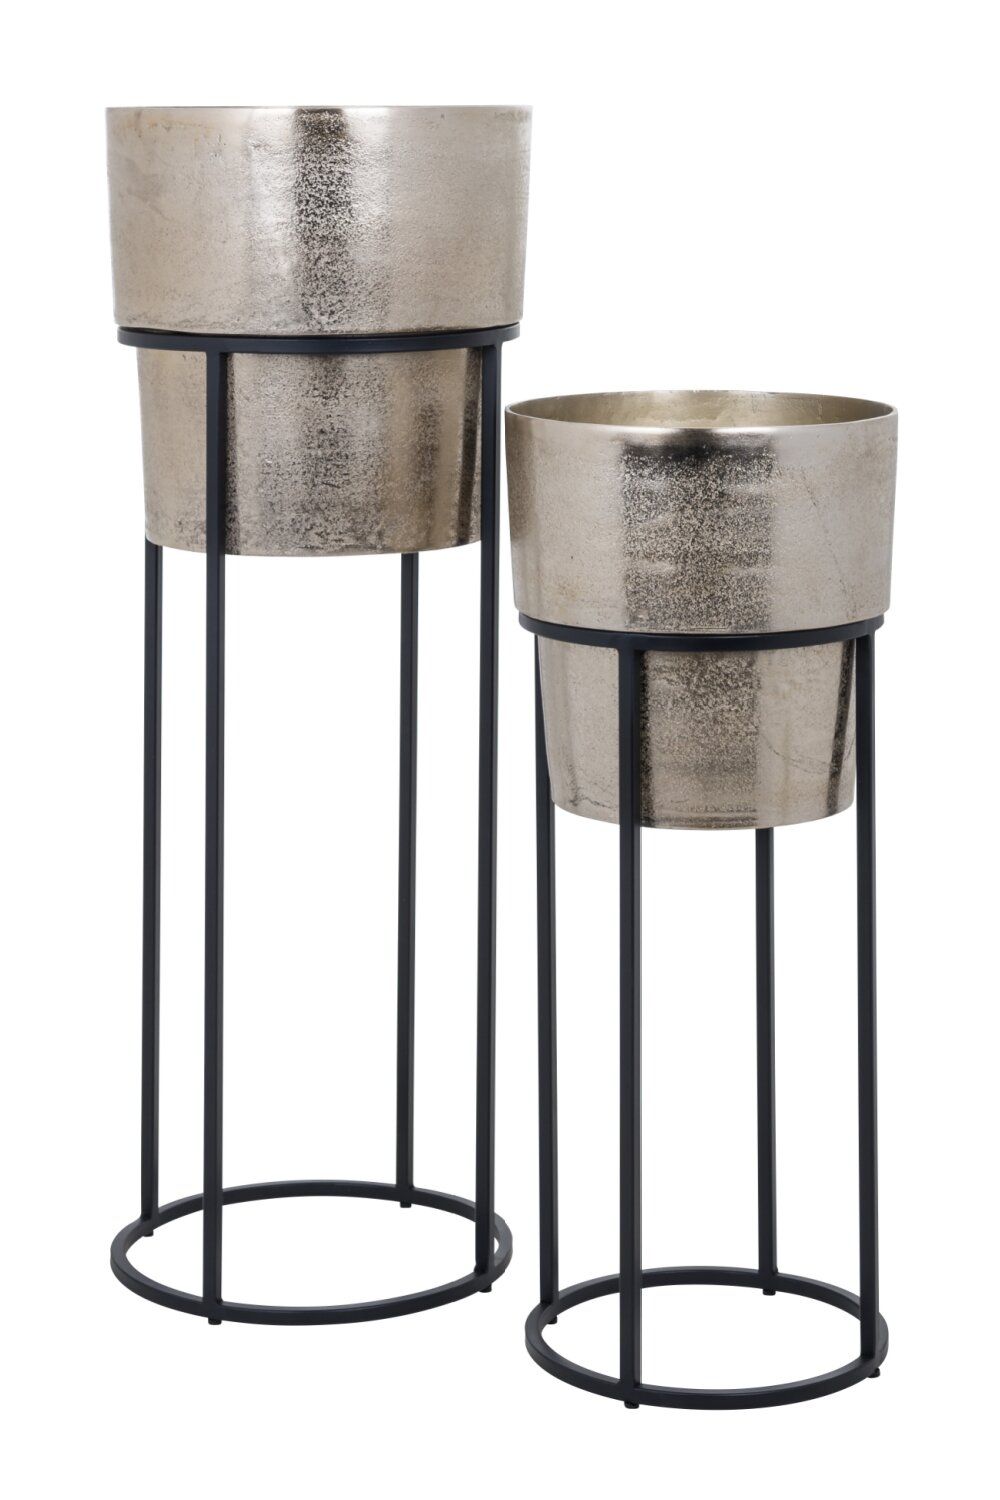 Oroa Round Pedestal Plant Stand | Wayfair Within Iron Base Plant Stands (View 15 of 15)